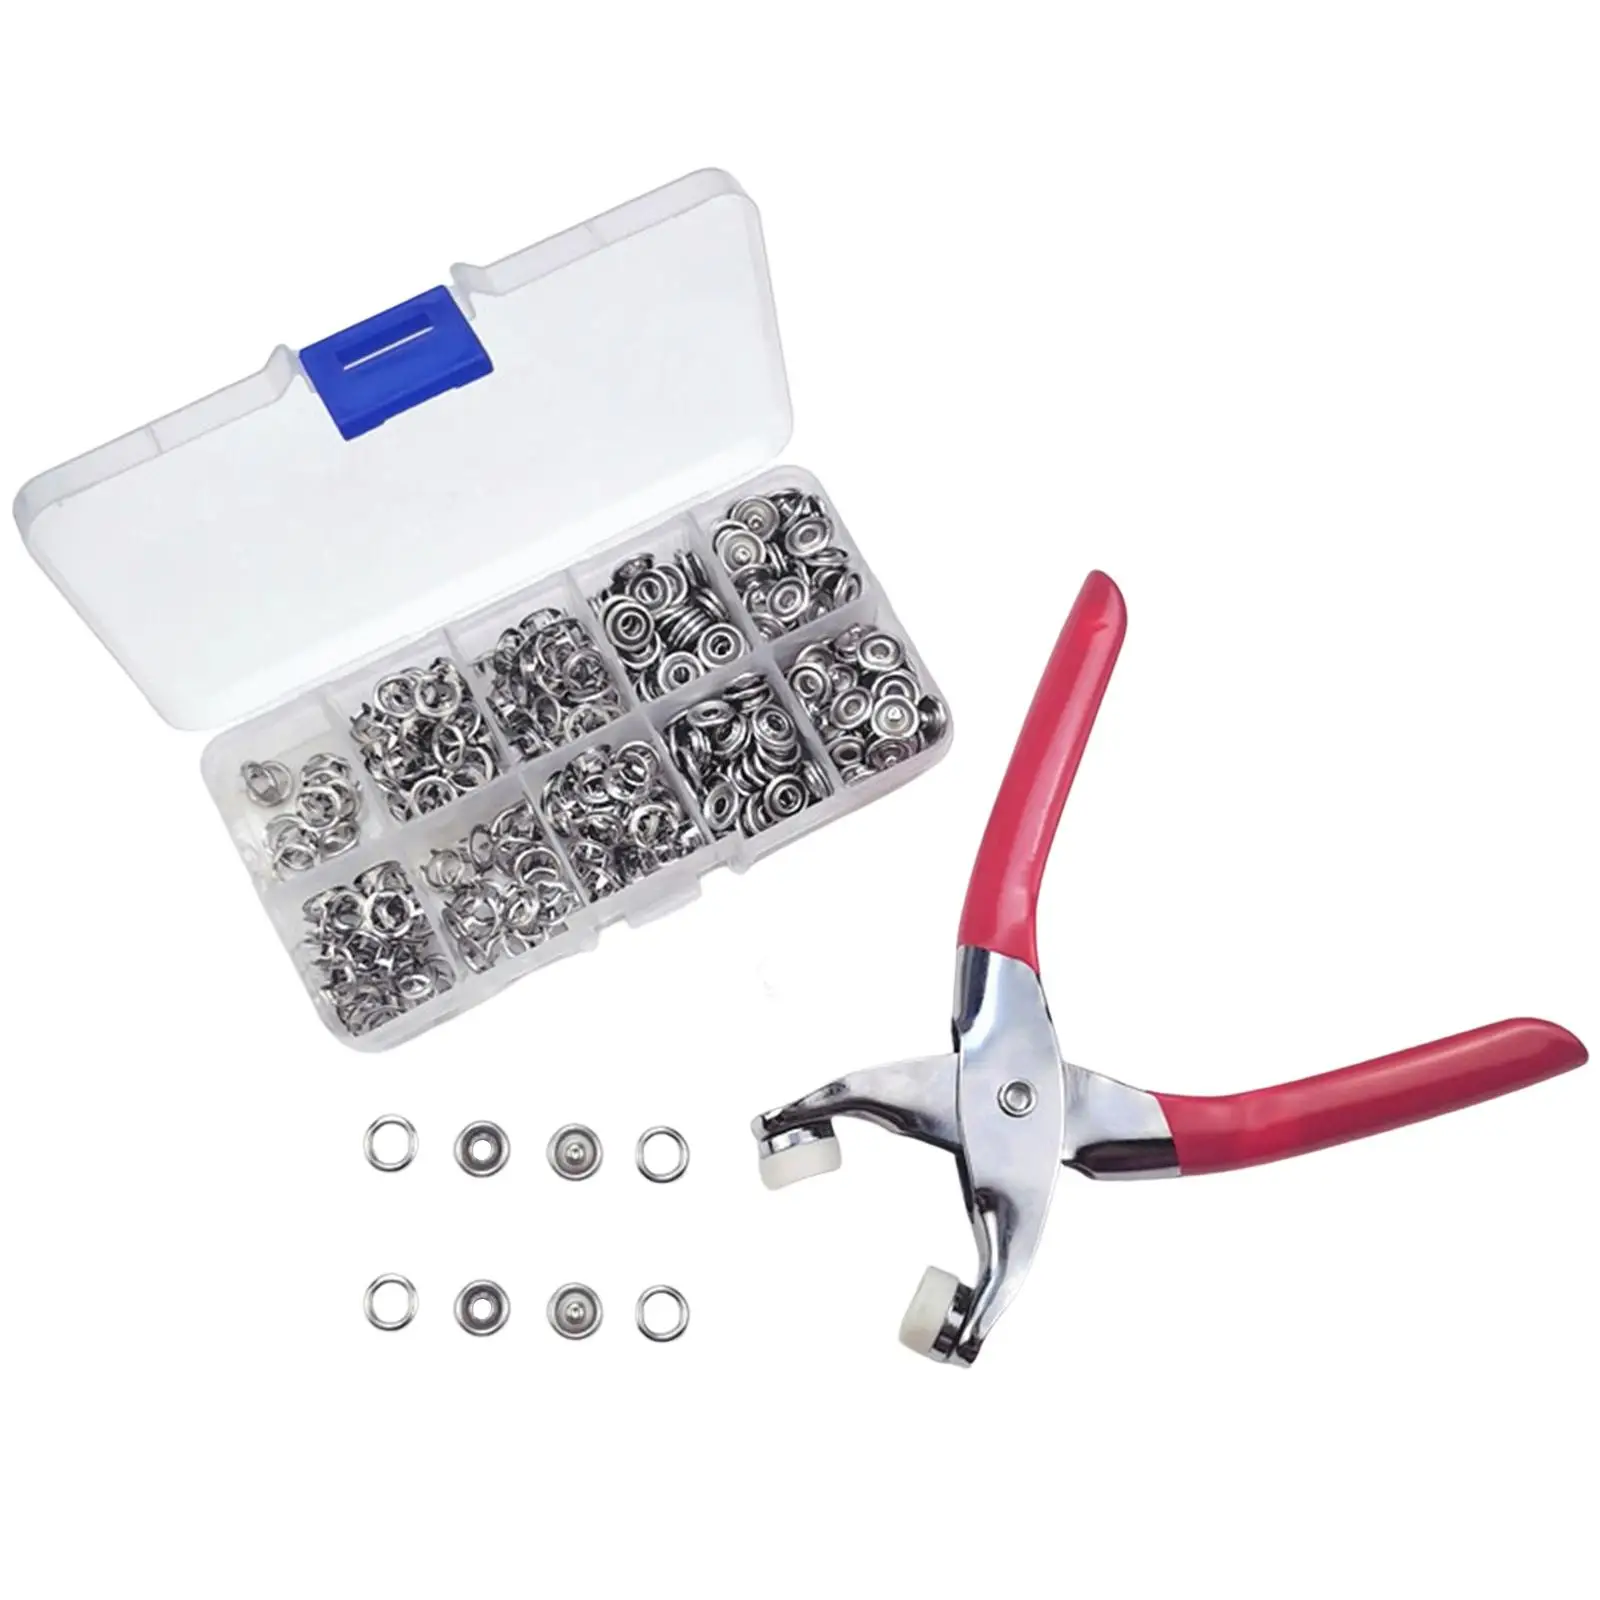 100 Sets Metal Snaps Buttons with Fastener Pliers Heavy Duty Studs Hollow Solid Prong for Clothing DIY Crafts Bags Jeans Sewing